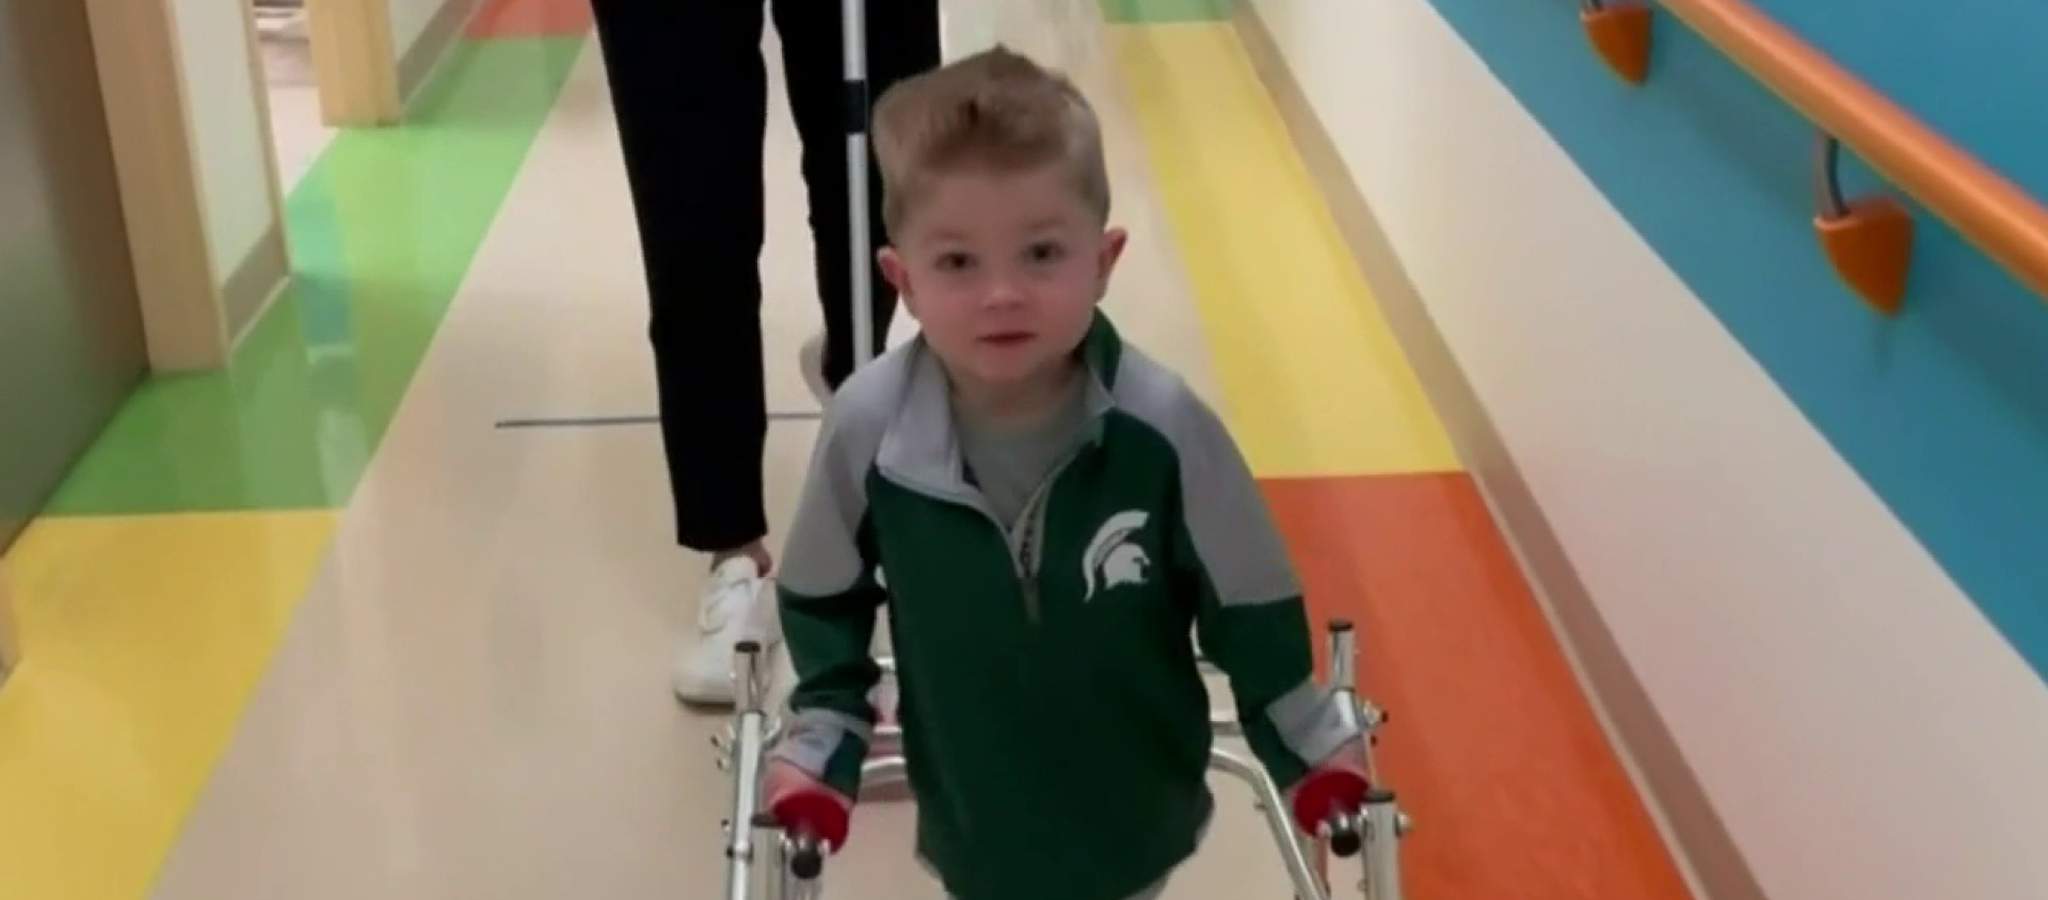 Local boy becomes inspiration after his miraculous steps to recovery